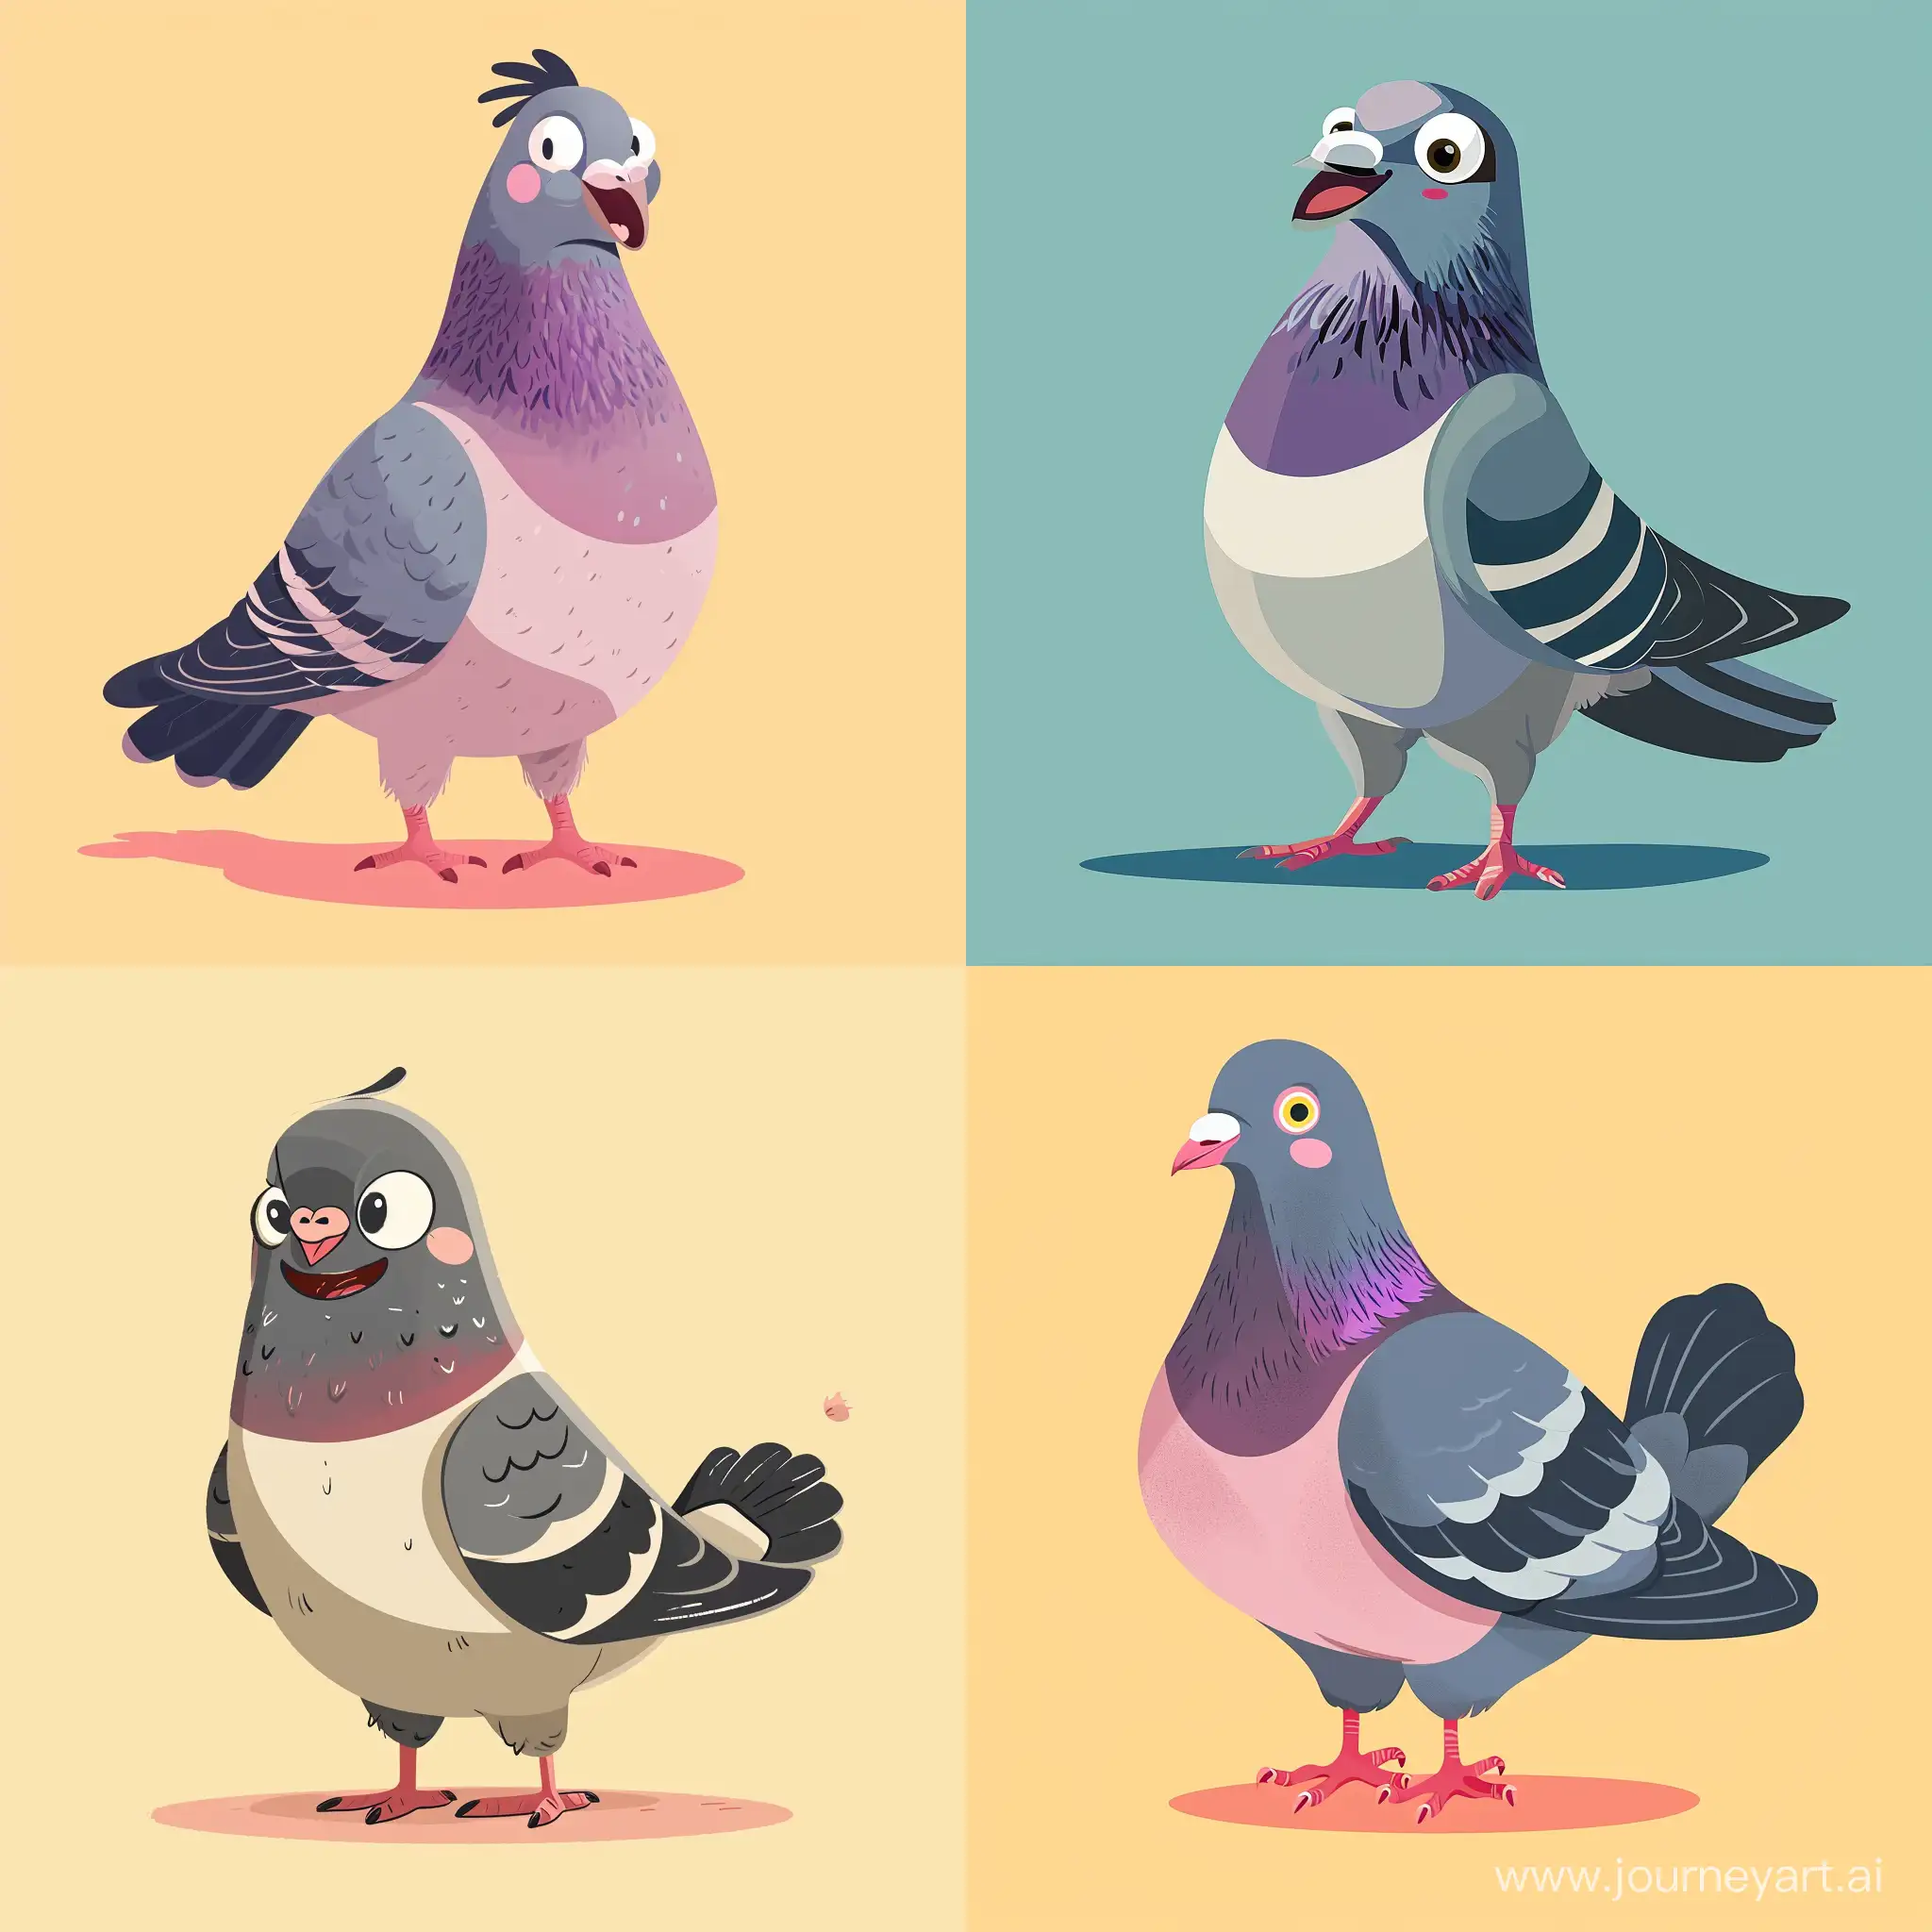 Cheerful-Cartoon-Pigeon-Smiling-in-a-Friendly-Manner